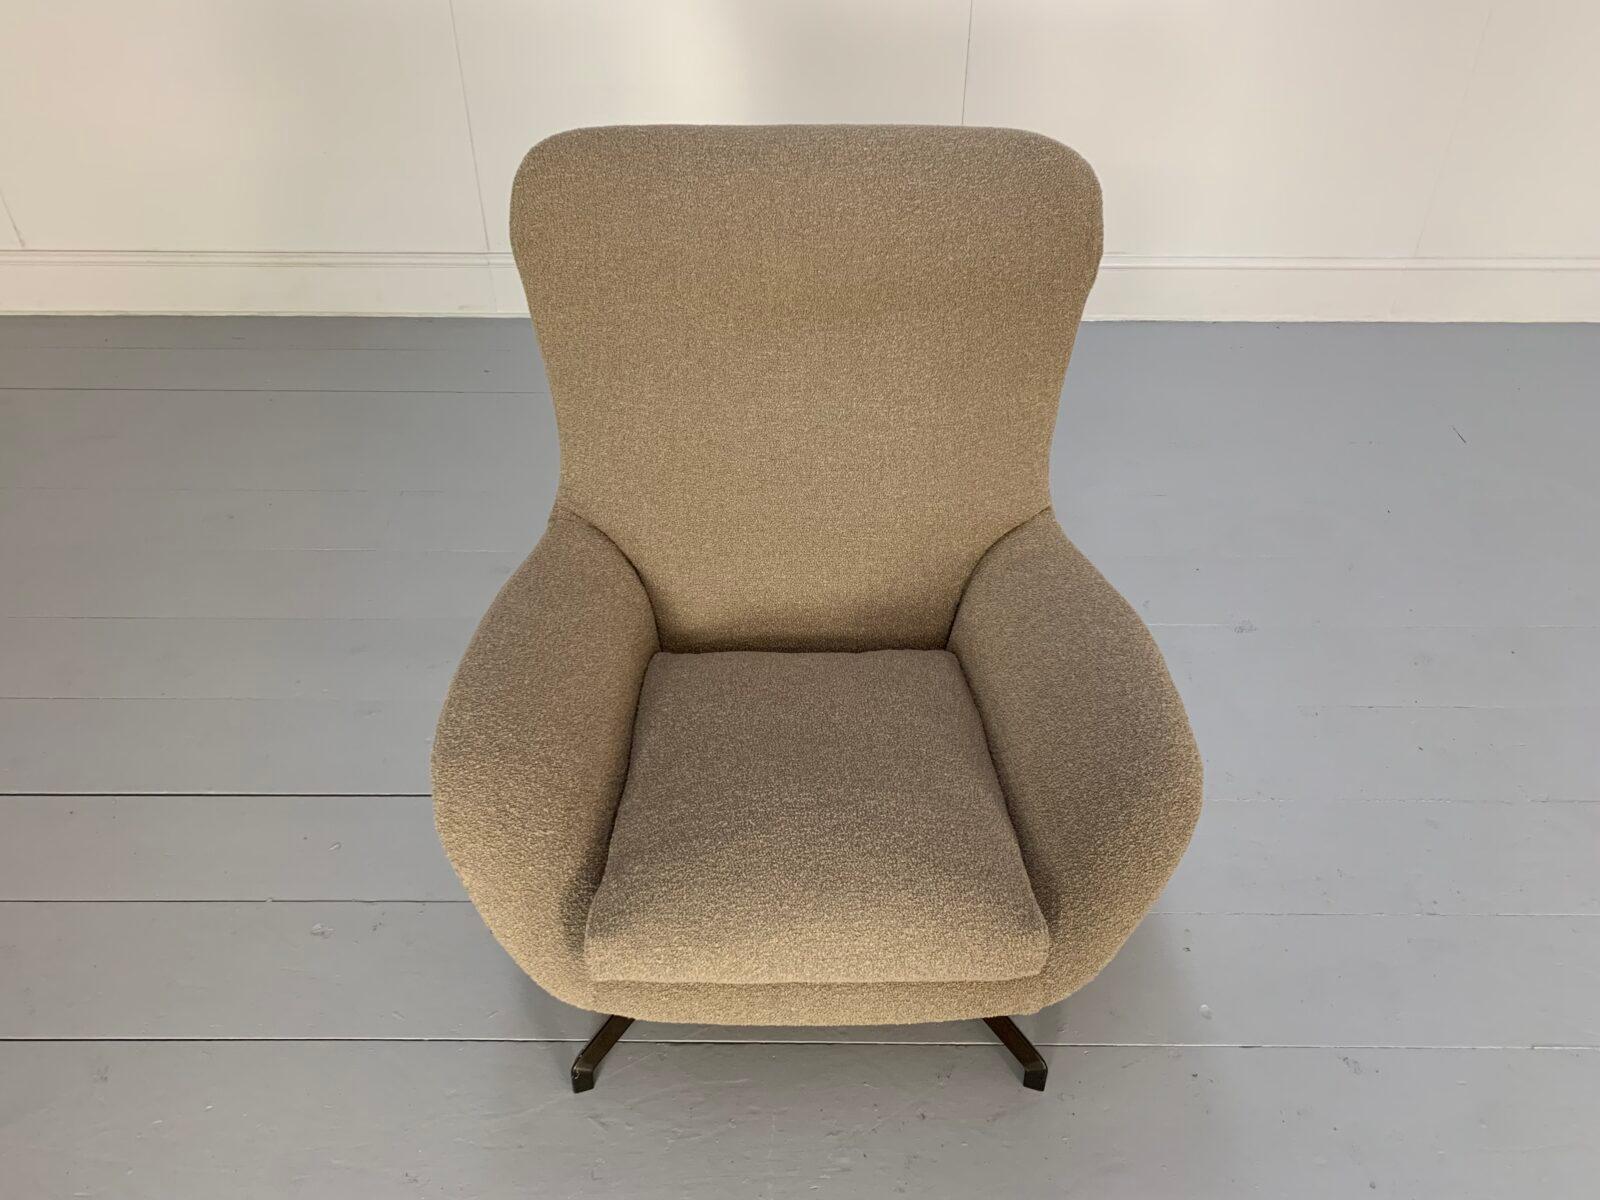 On offer on this occasion is a rare, sublime Minotti “Jensen” High-Back armchair, dressed in a peerless, top-grade woollen-boucle fabric, and with gloss pewter-metal star-shaped swivel-base.

As you will no doubt be aware by your interest in this